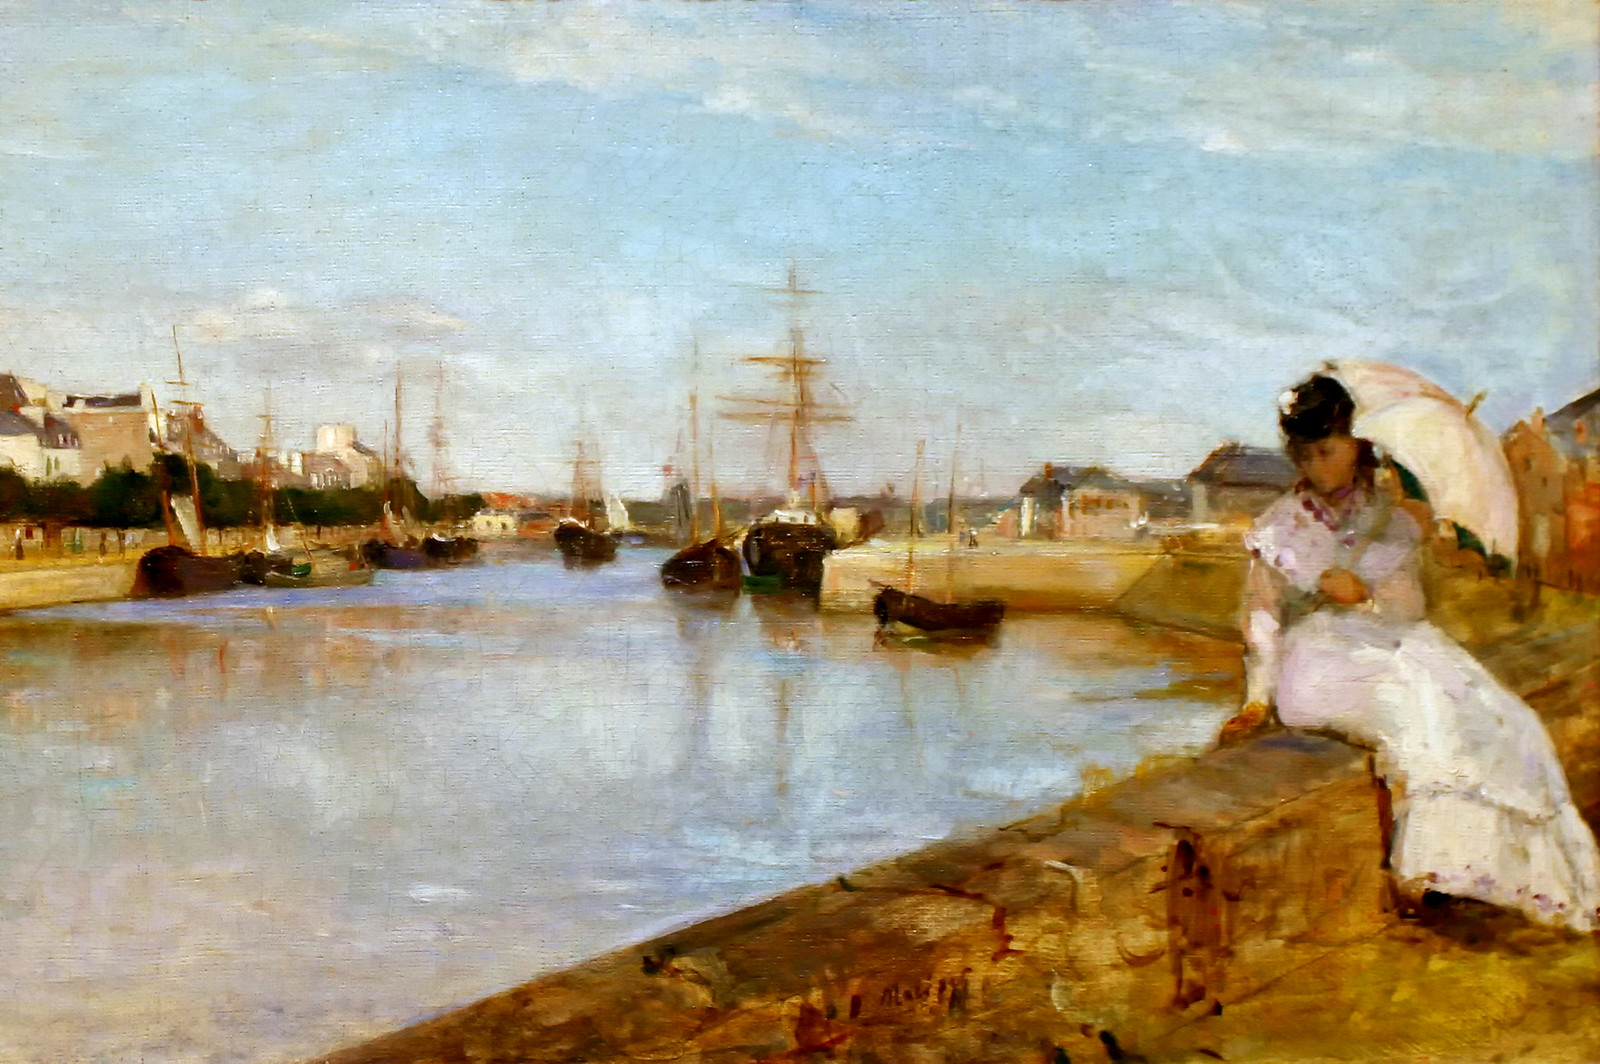 The Harbor at Lorient by Berthe Morisot, 1869